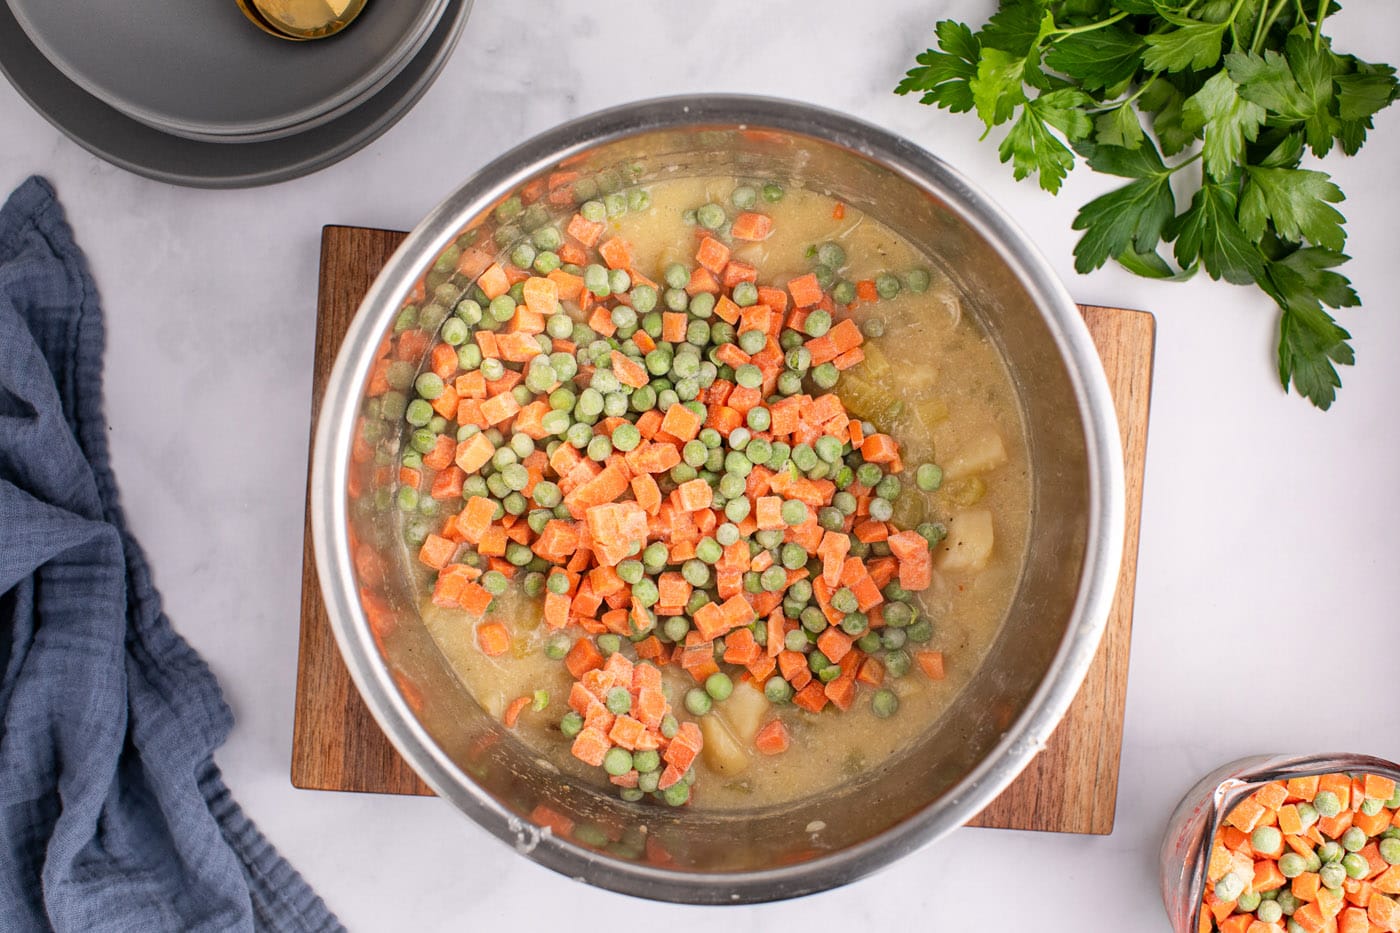 frozen peas and carrots added to chicken pot pie mixture in the instant pot